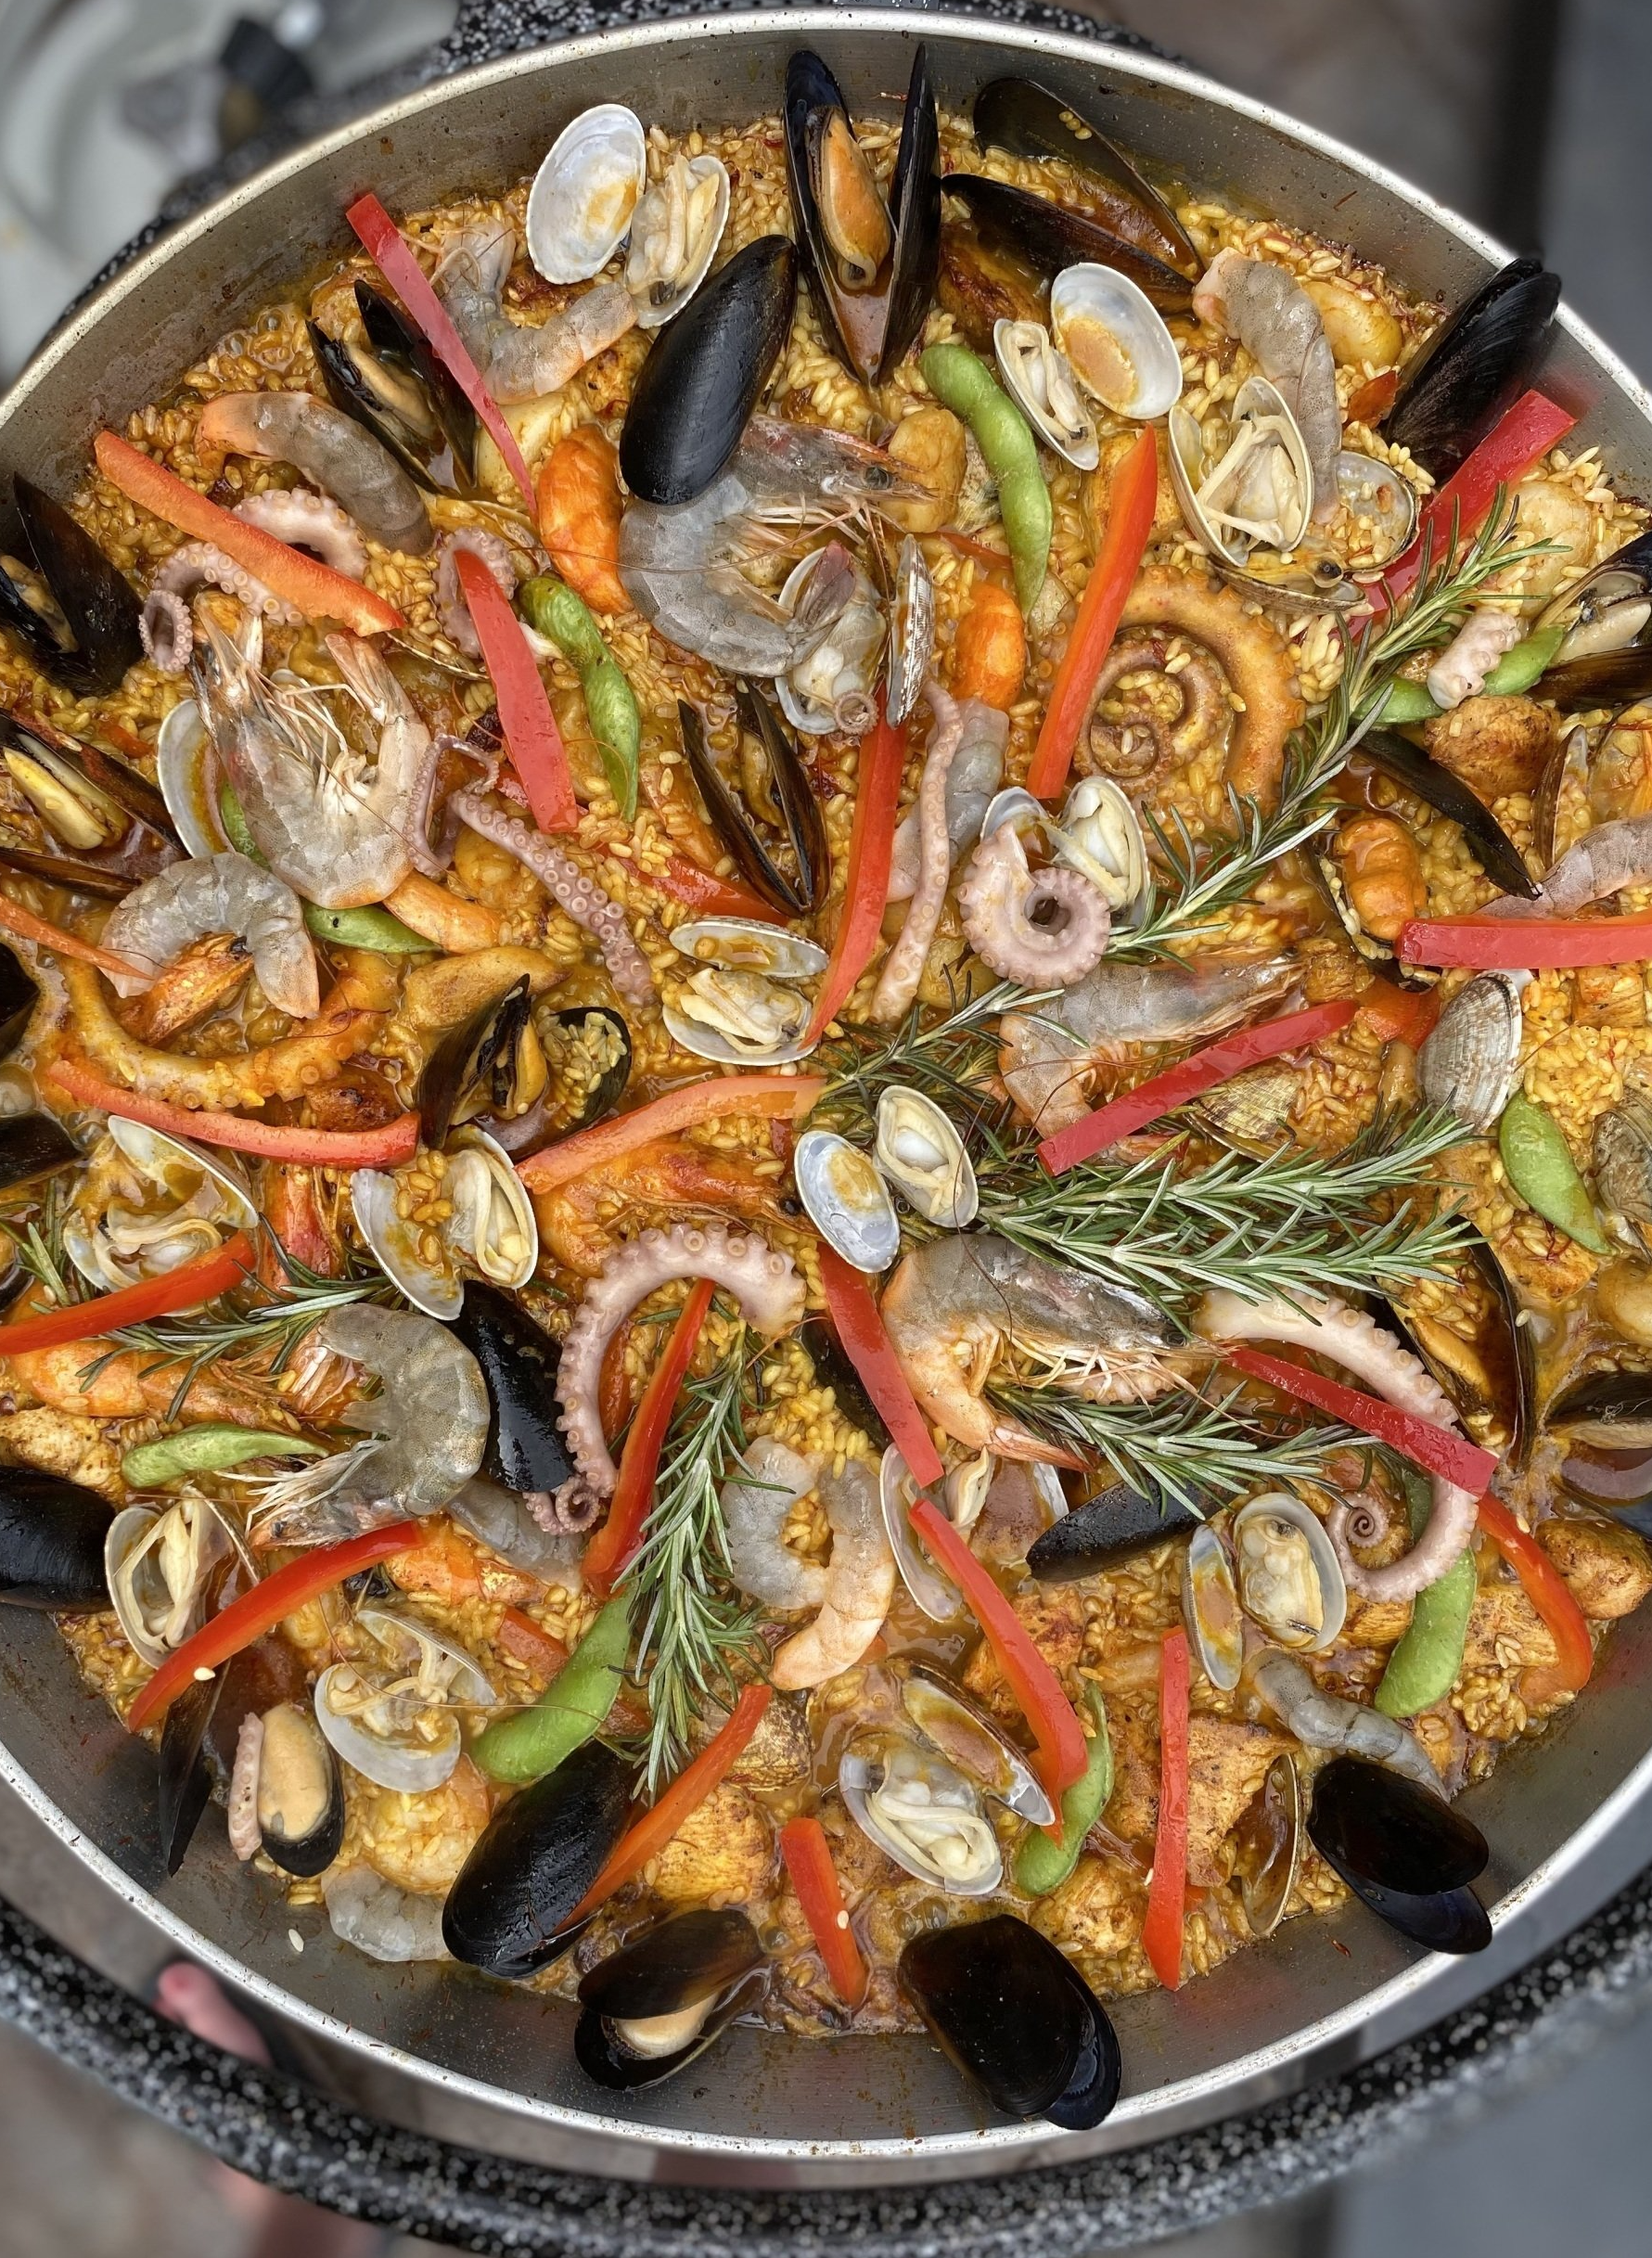 Get the Party Started in Columbia, MO With Premier Catering Services Including Tapas, Paella, Salads & More!